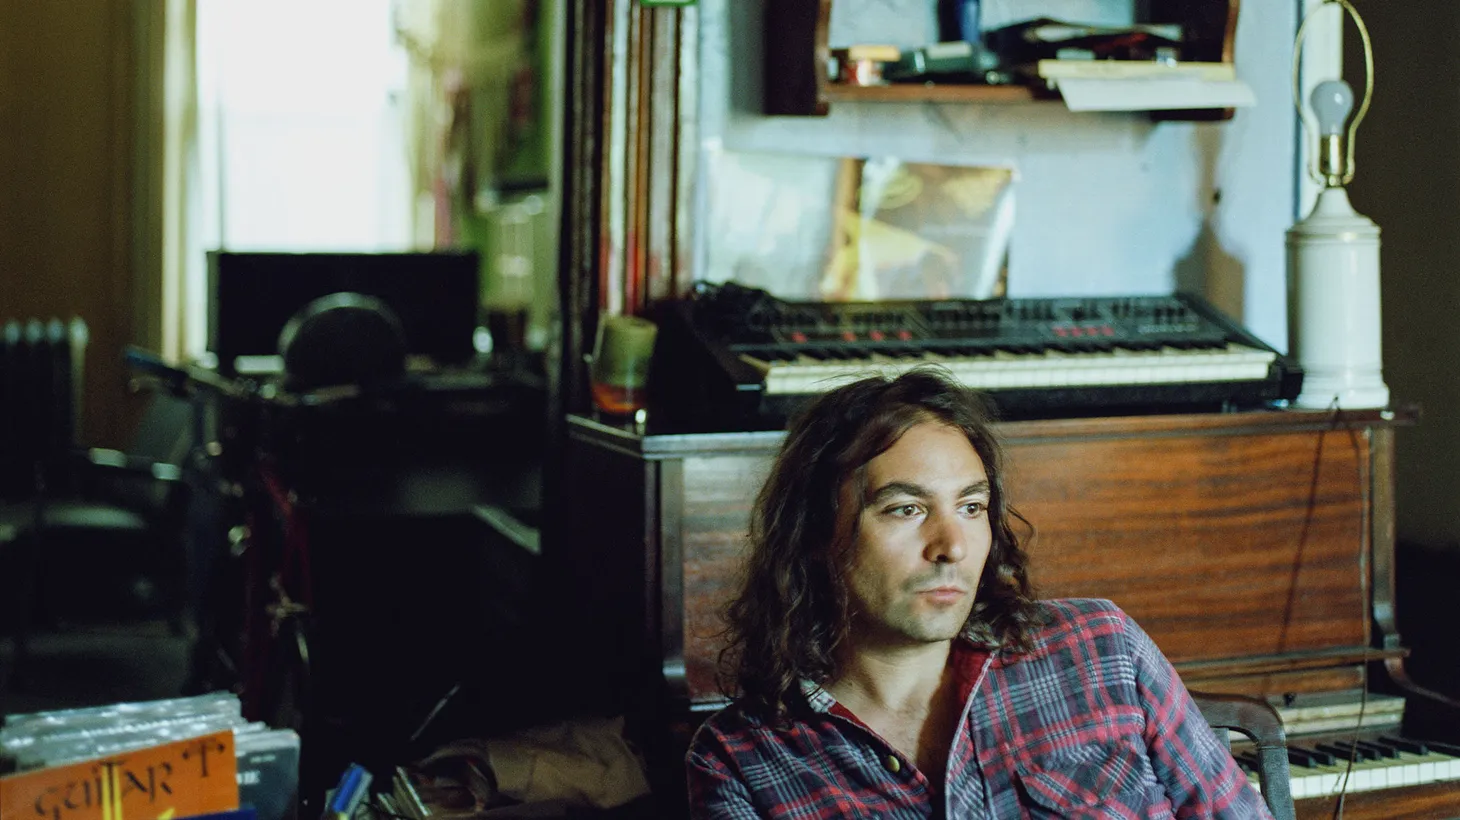 Jason Bentley has called The War On Drugs' new album one of his favorites of the year.